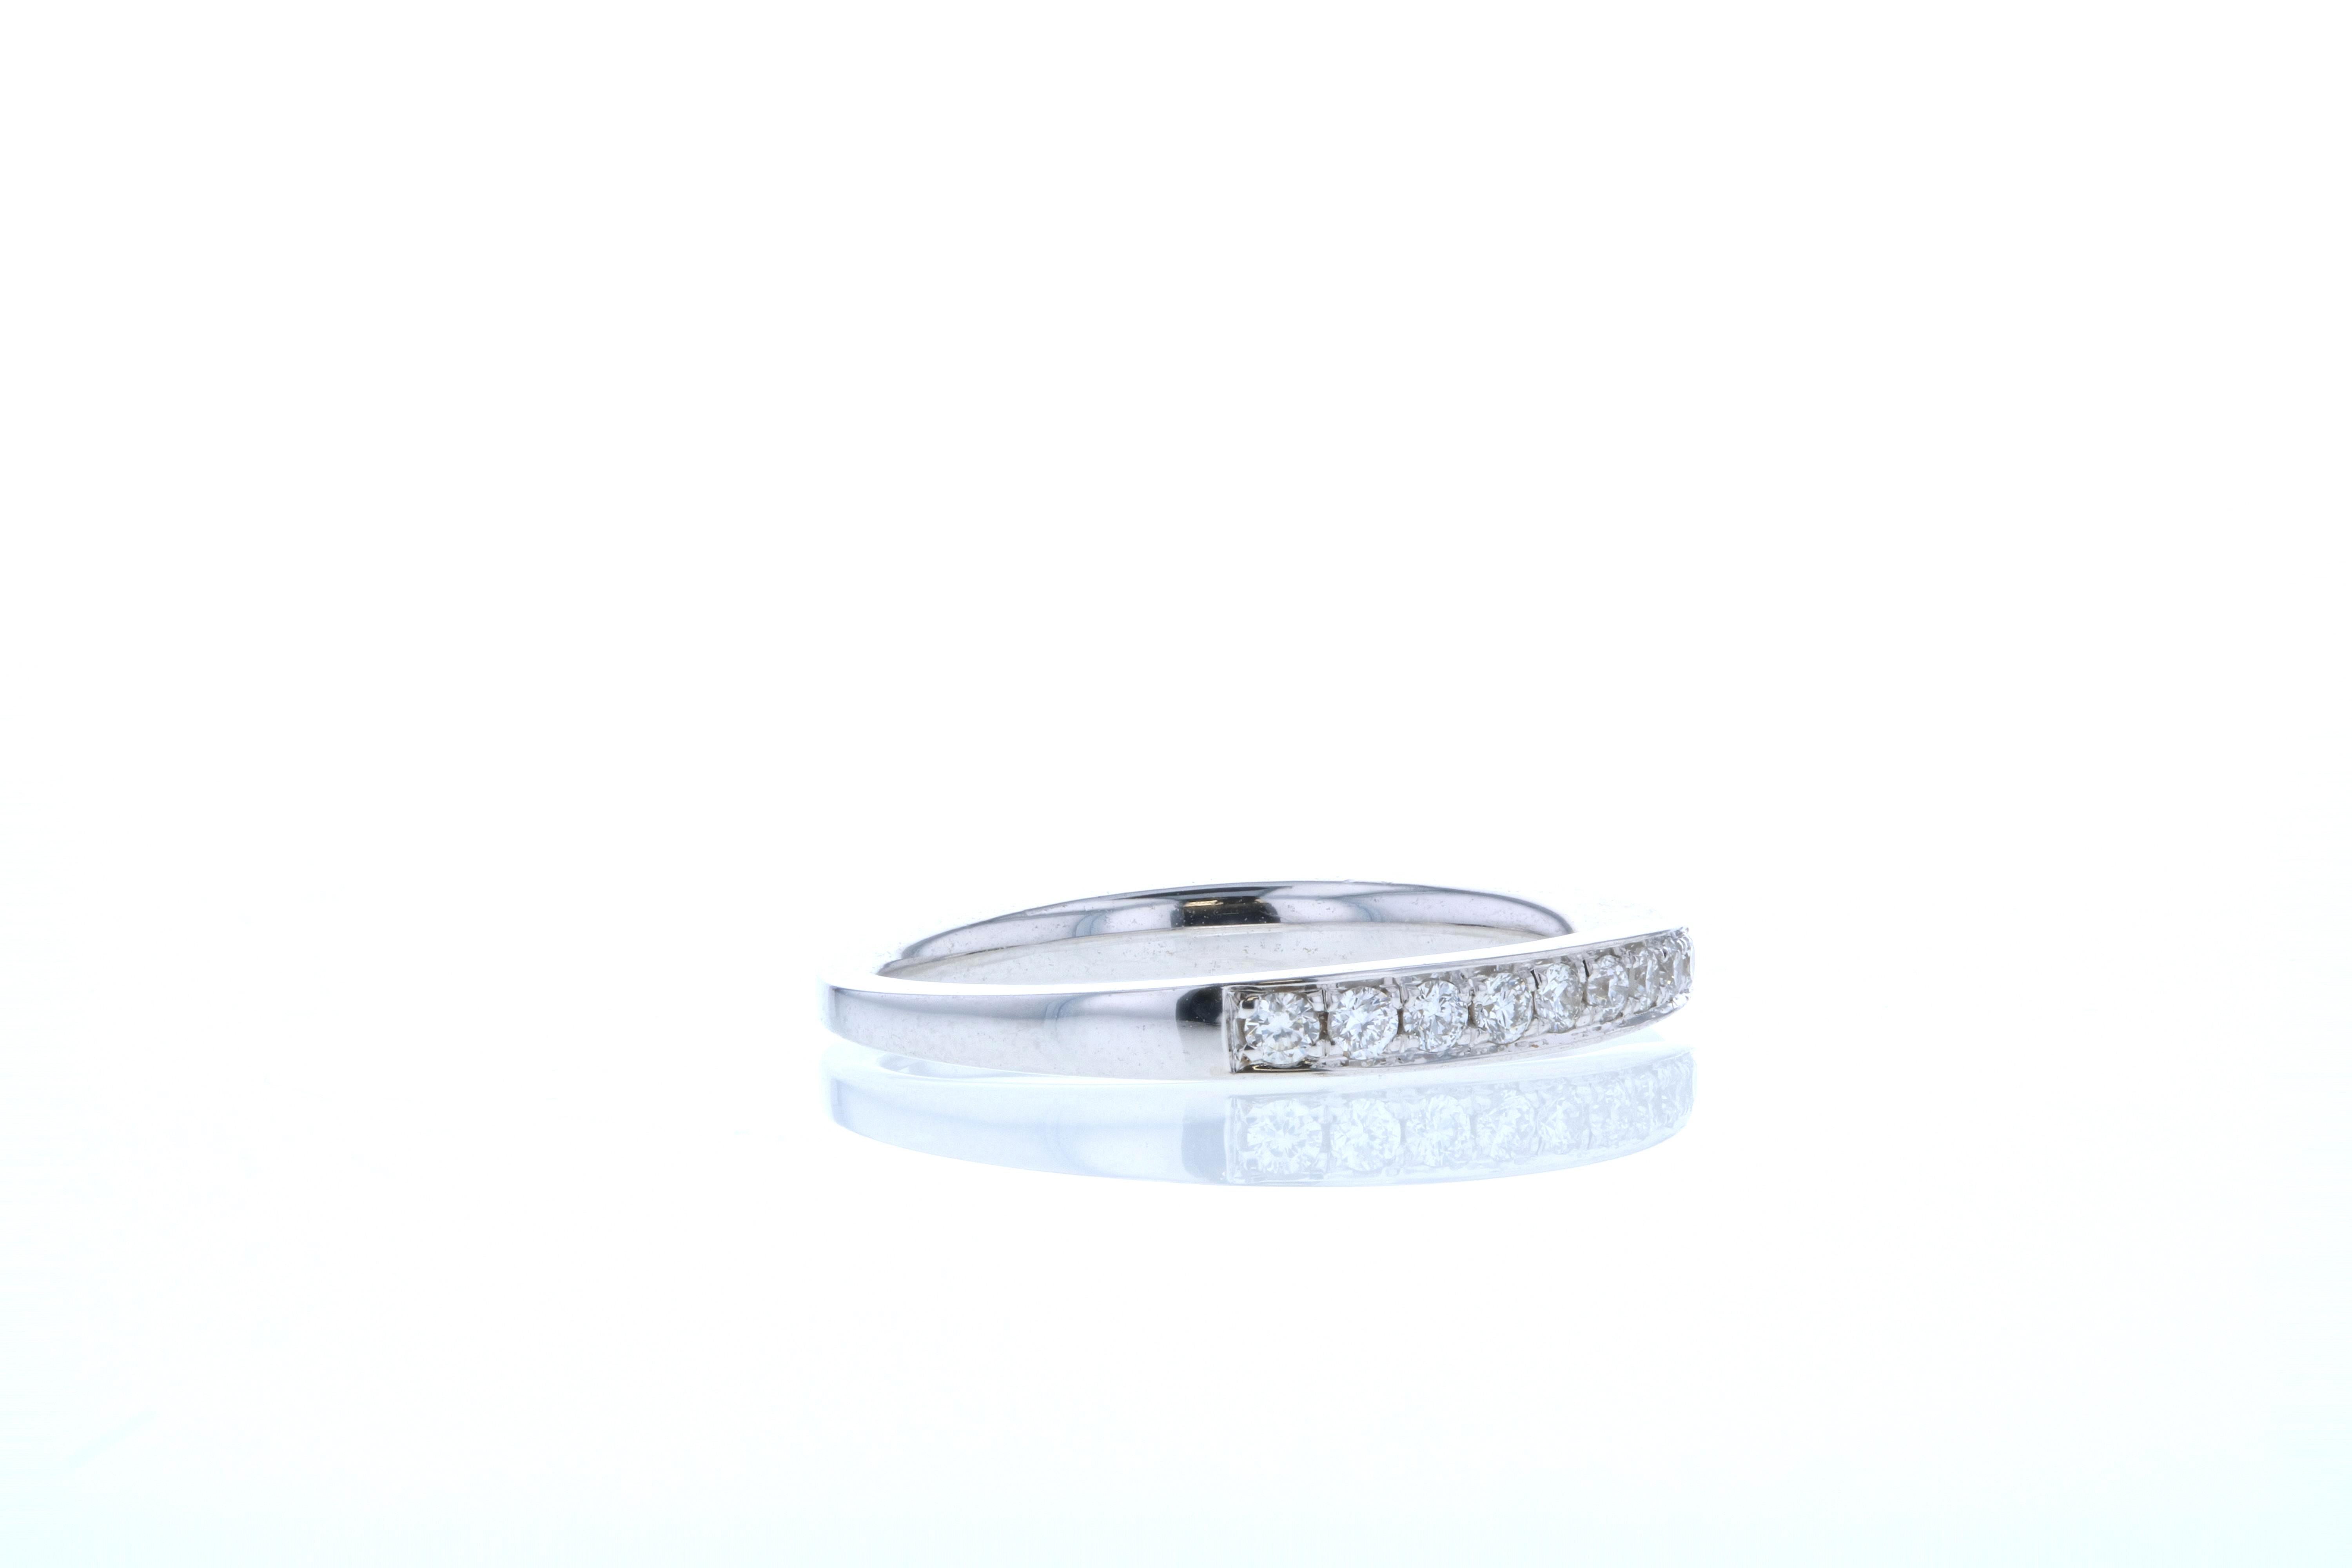 A beautiful way to compliment your engagement ring is with what is known as a 